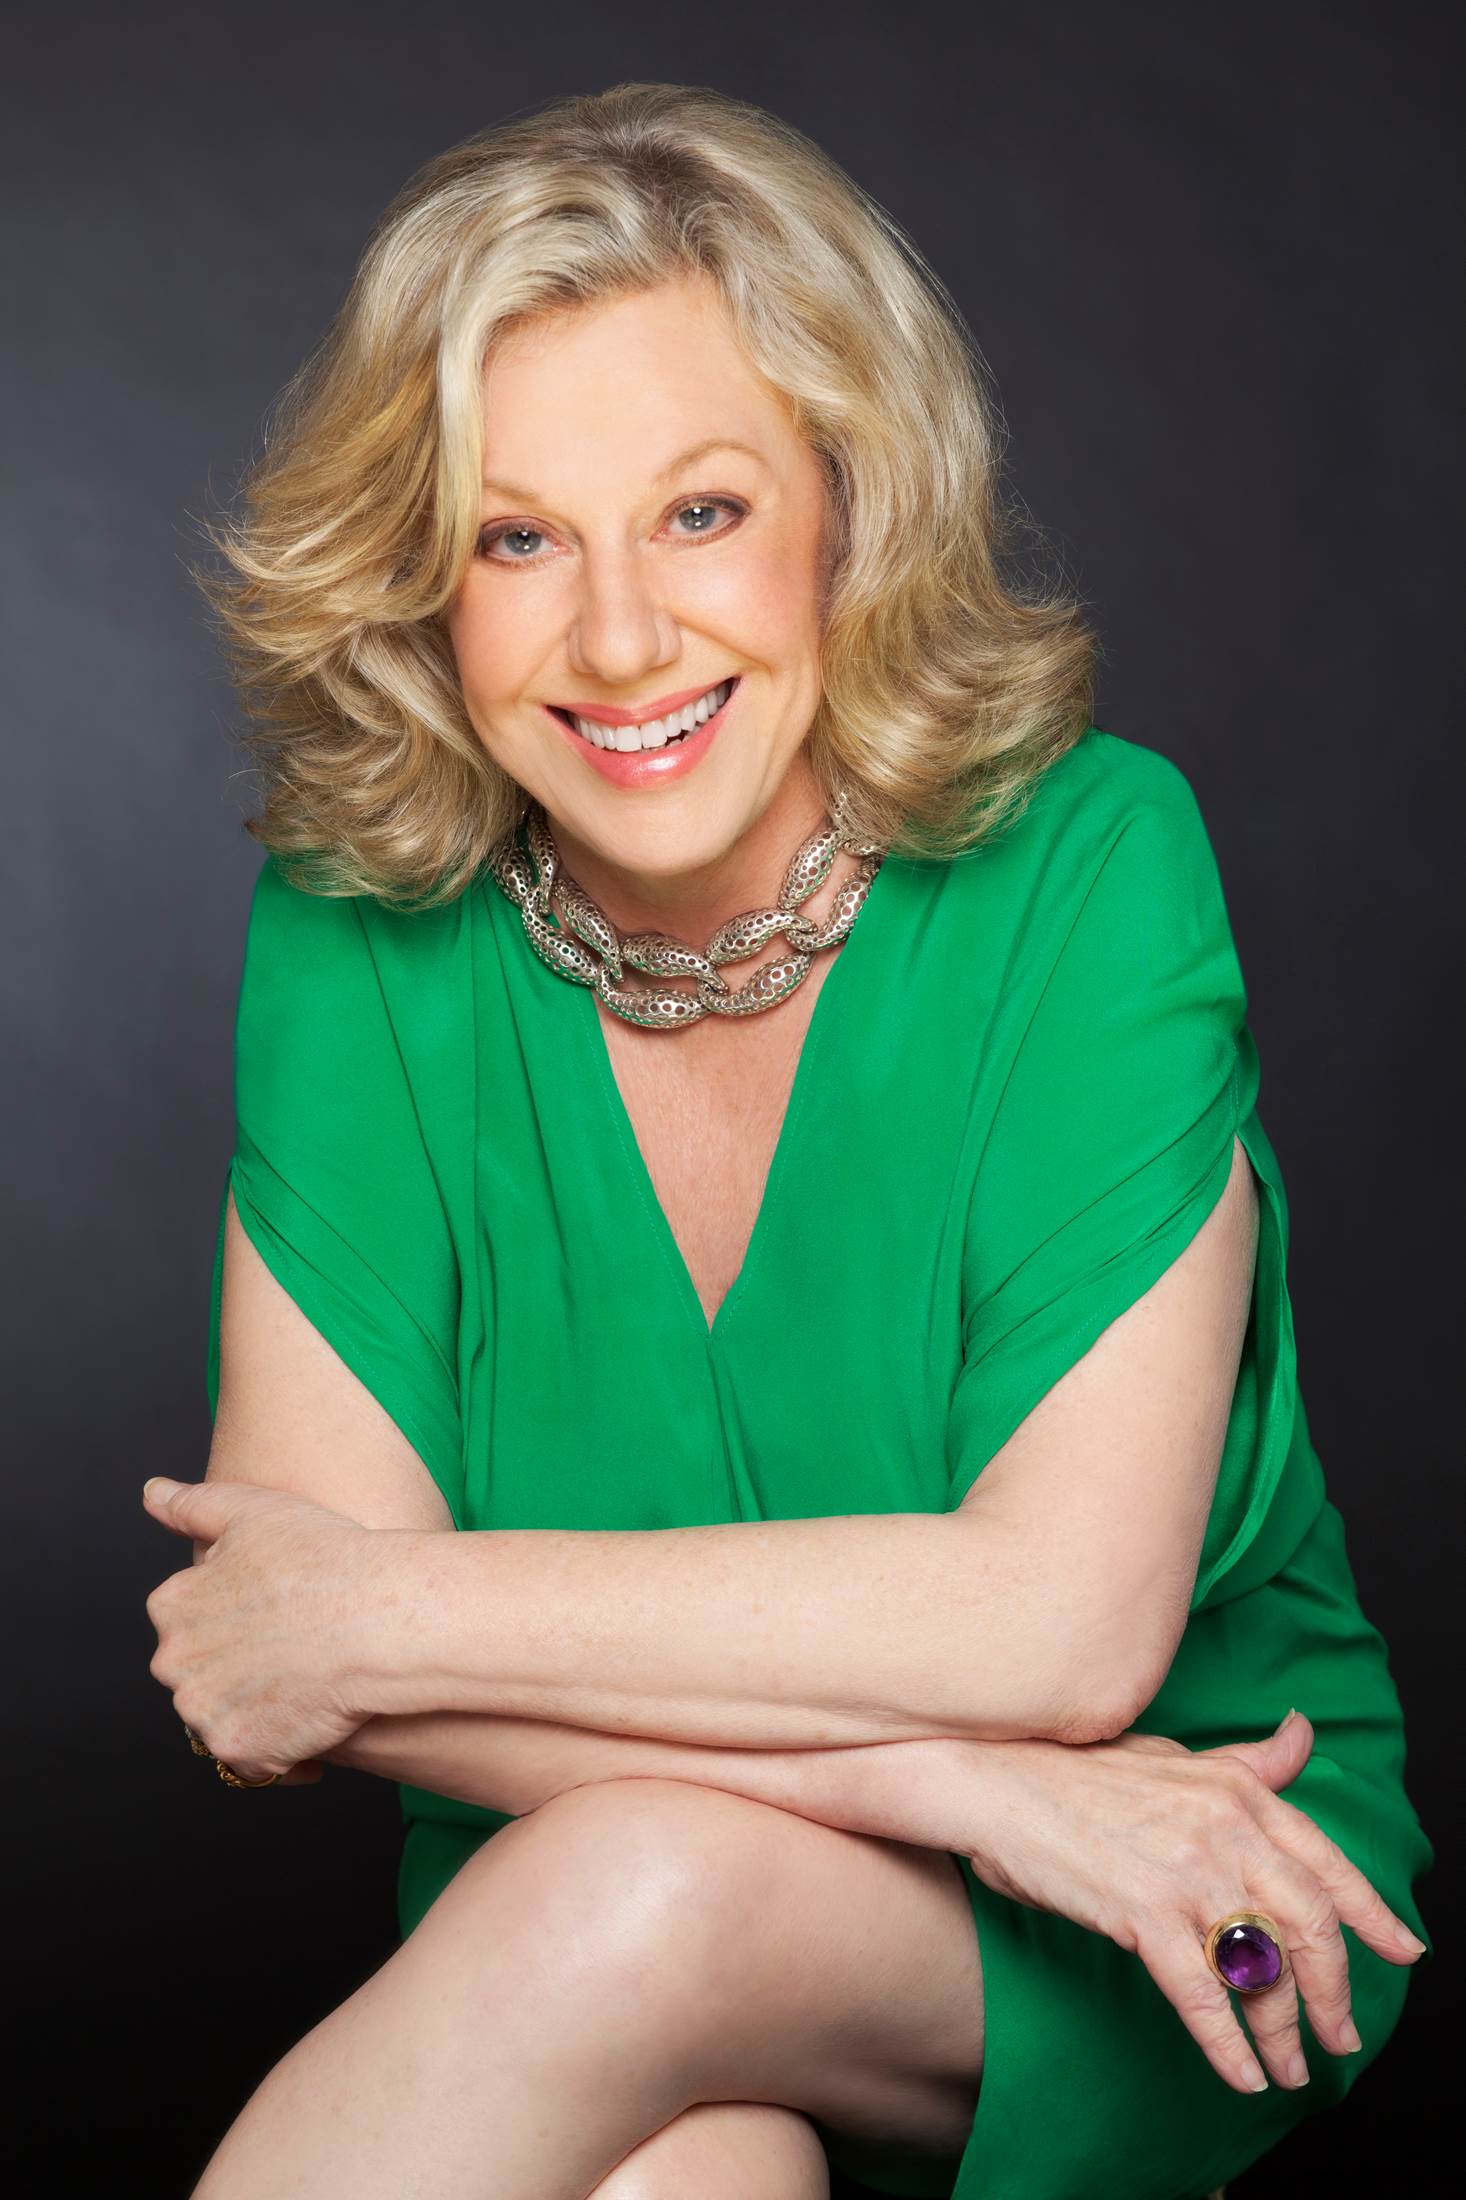 Writing the Story of Your Life with Erica Jong